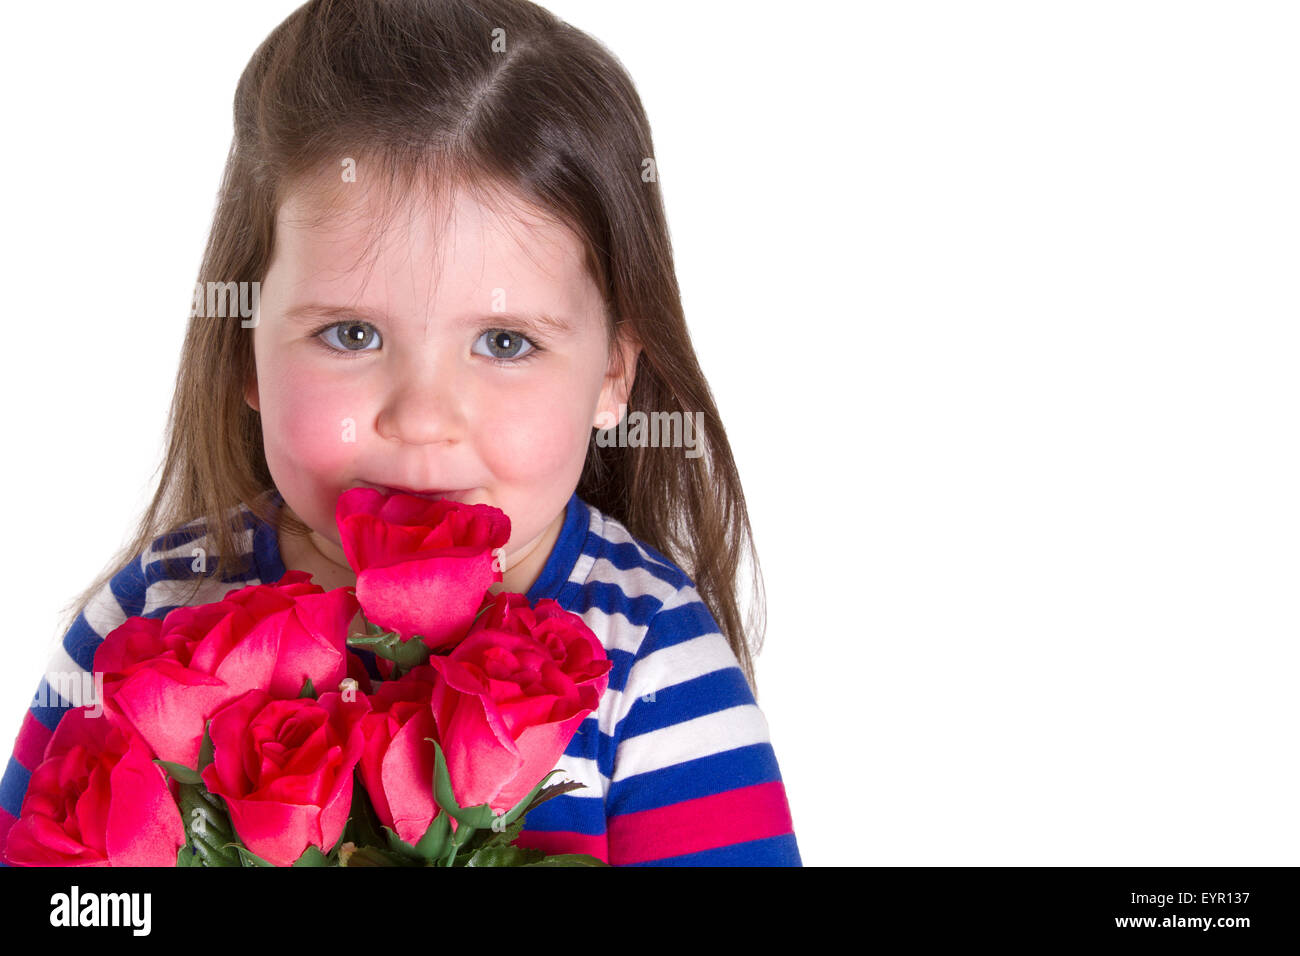 Young girl holding a bunch of artifiical roses smelling them. Looking at the camera and lots of copy space. Stock Photo